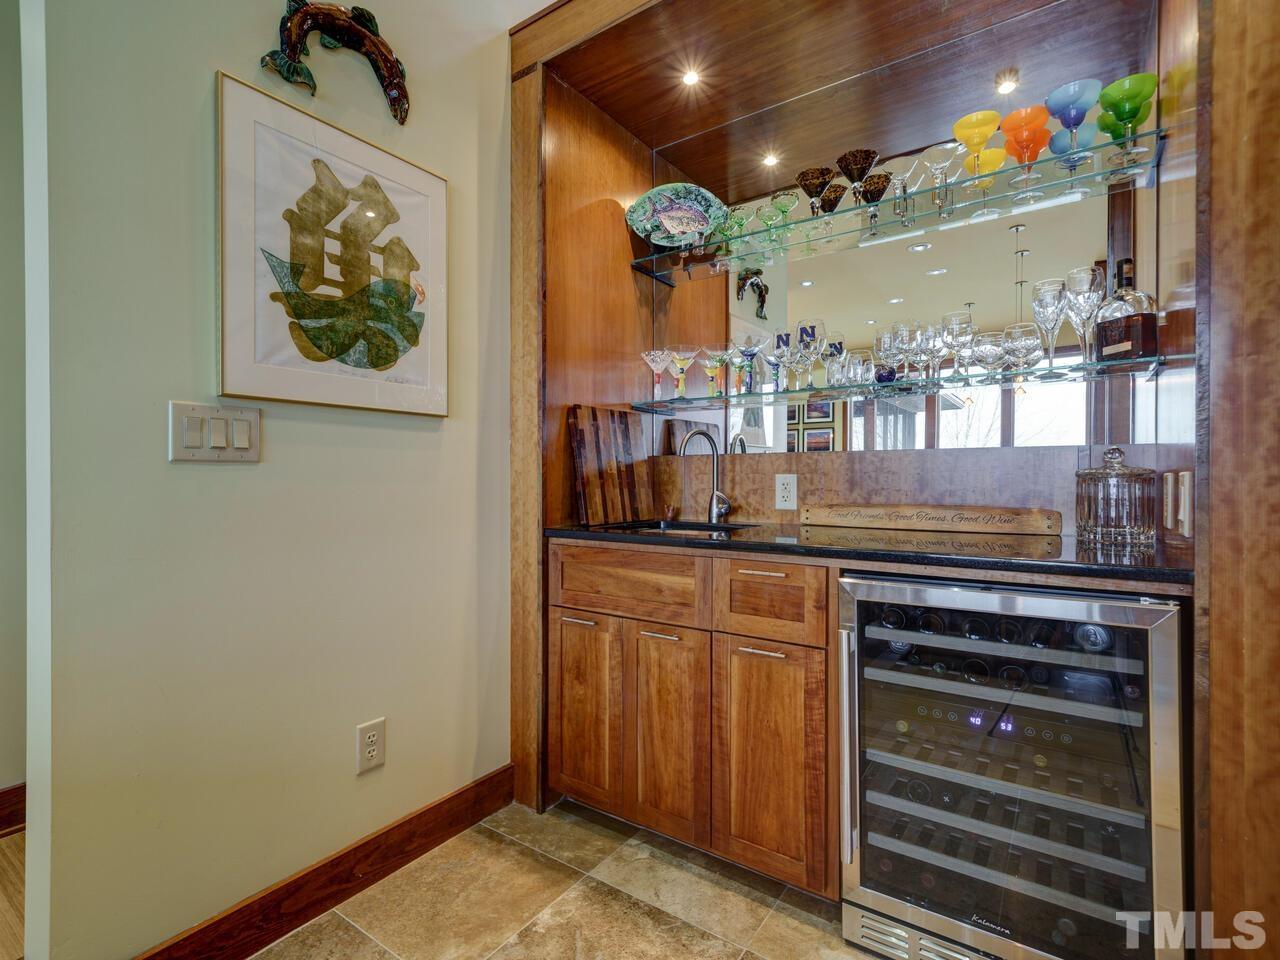 Wet Bar area with Wine Frig will come in handy for all of the entertaining that you are sure to do.